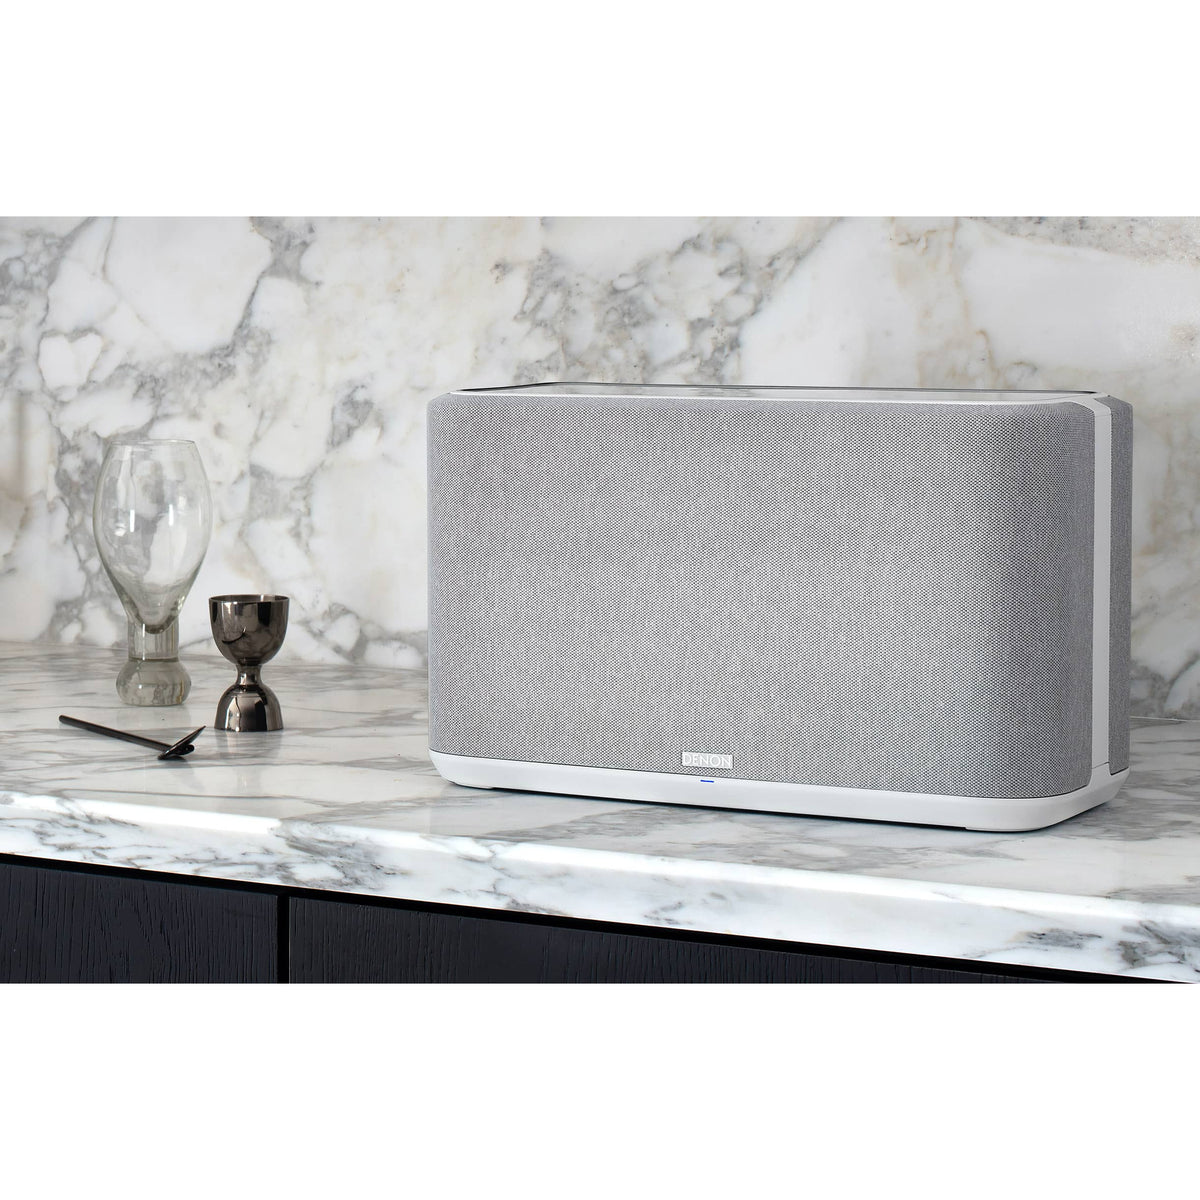 Denon Home 350 Wireless Smart Multiroom Speaker with Built-In HEOS - White | DENONHOME350WTE2GB from Denon - DID Electrical